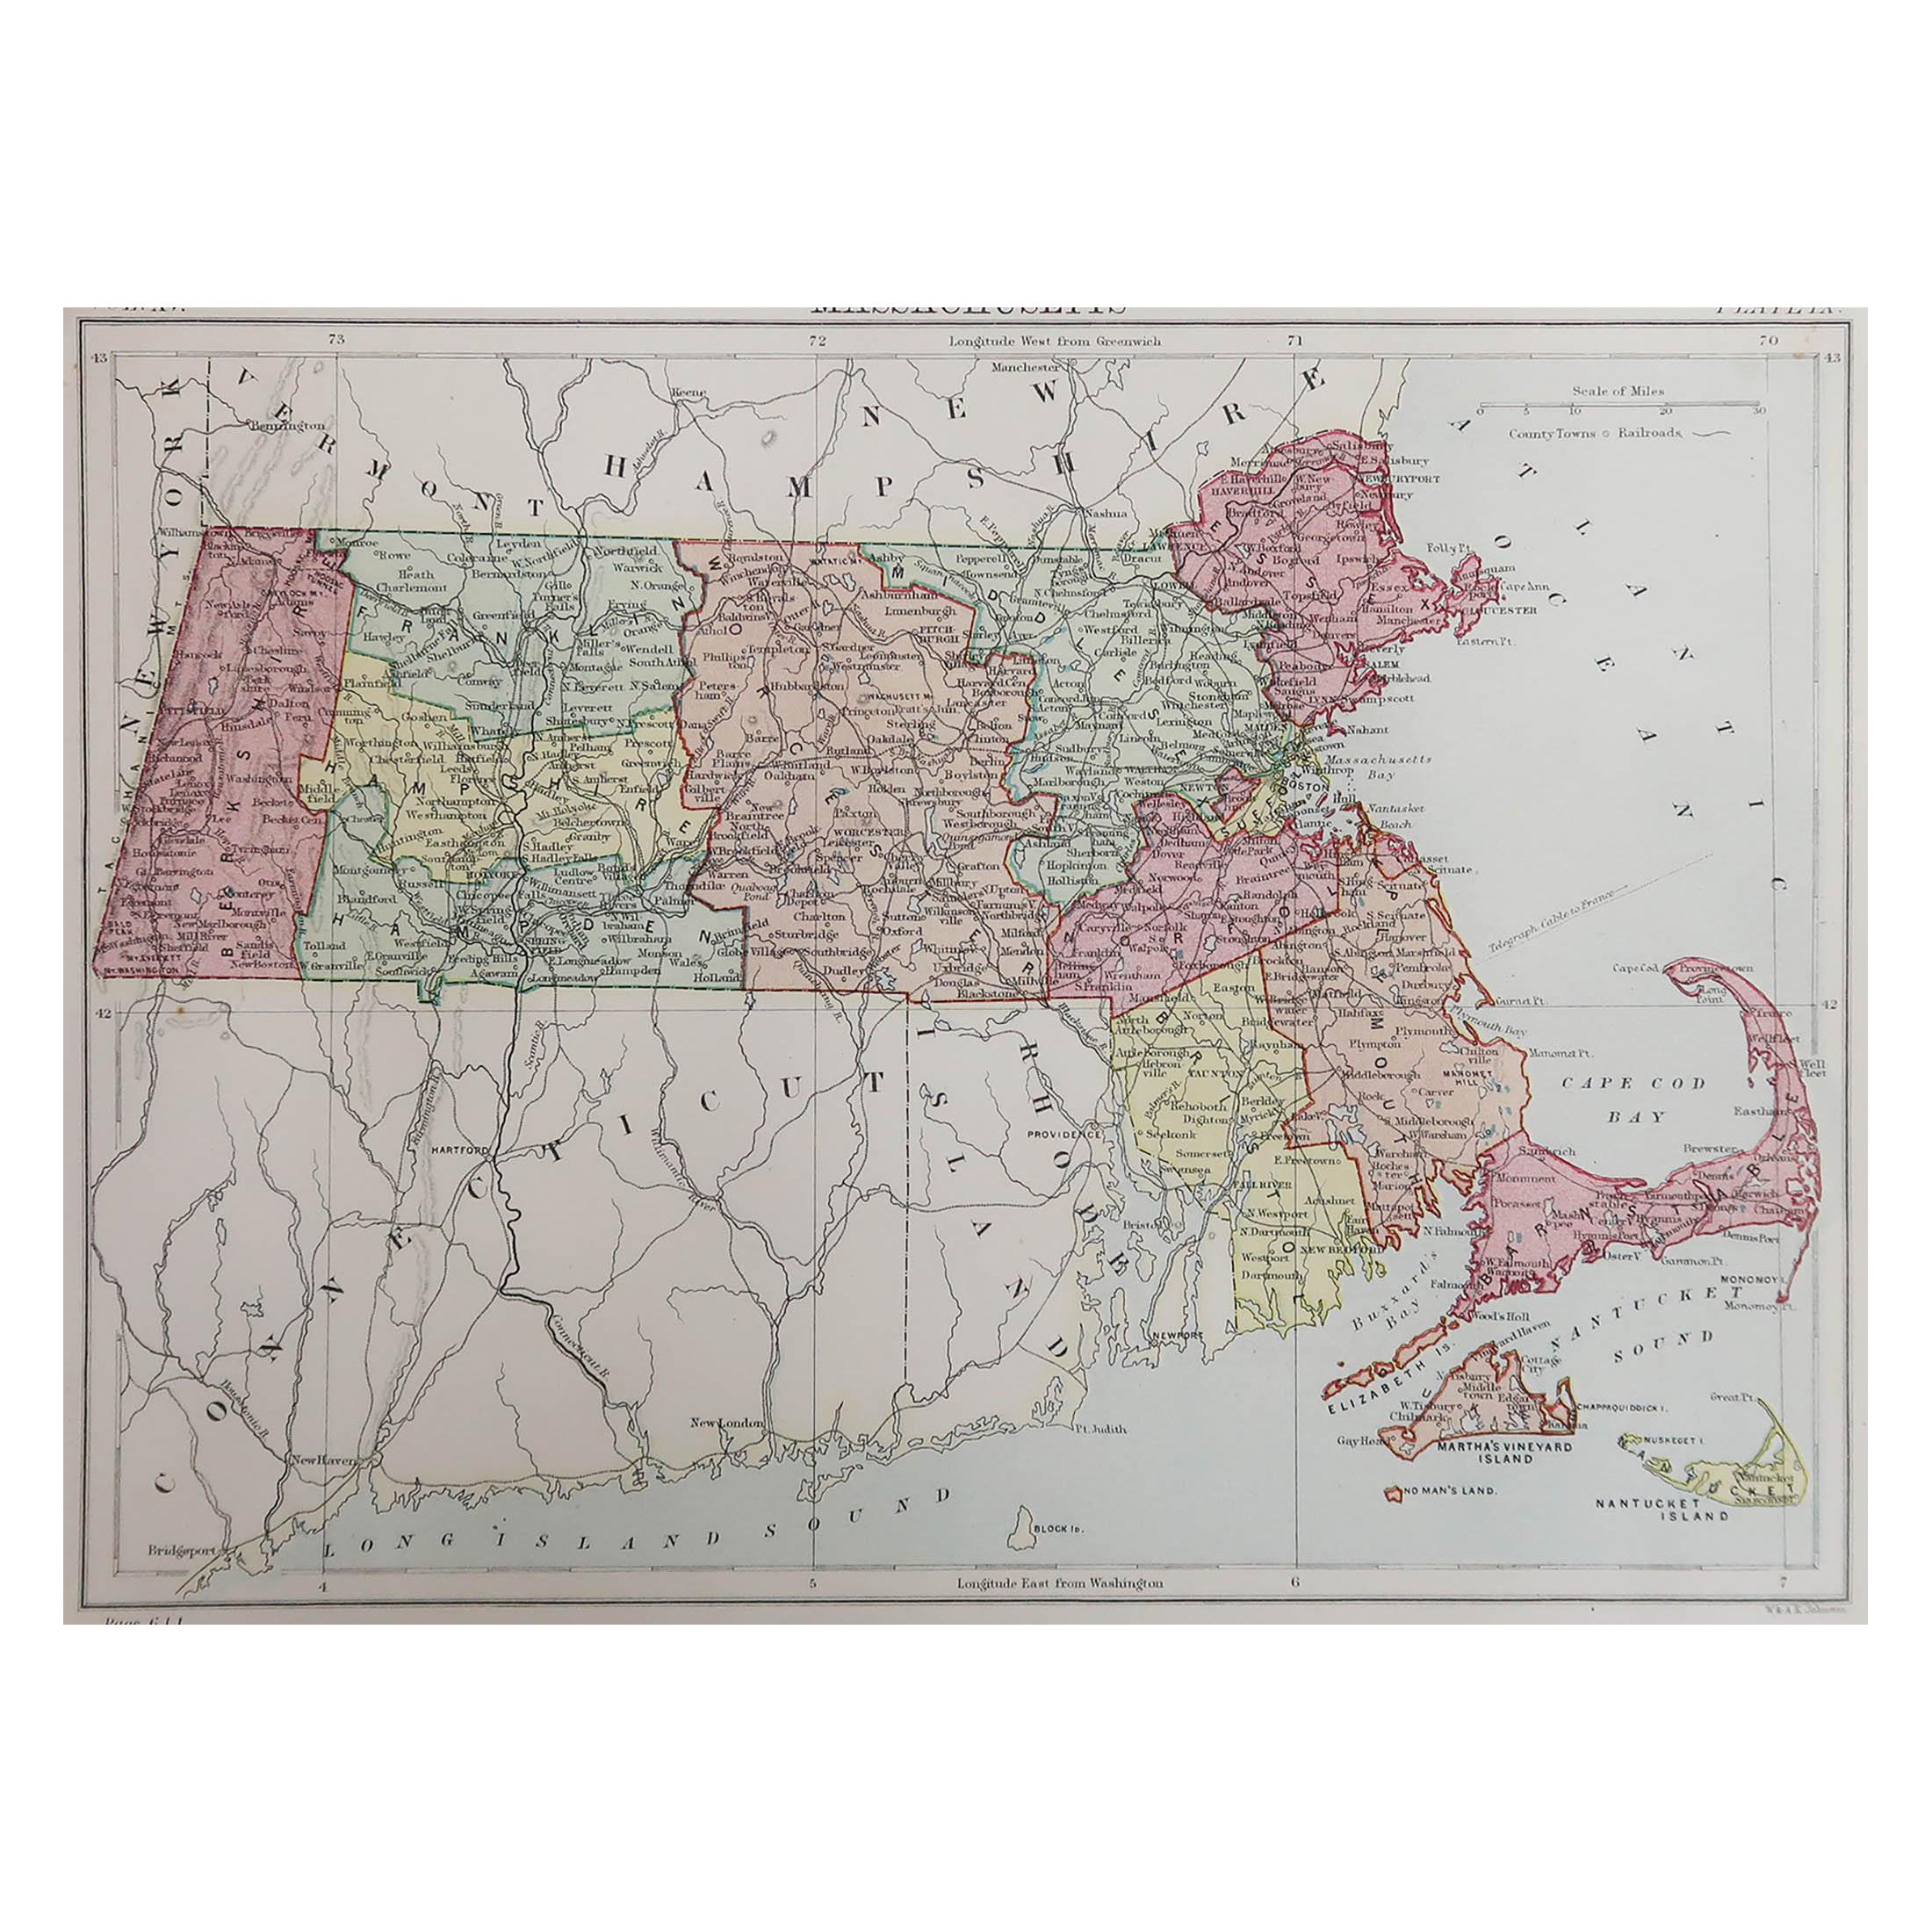 Original Antique Map of the American State of Massachusetts, 1889